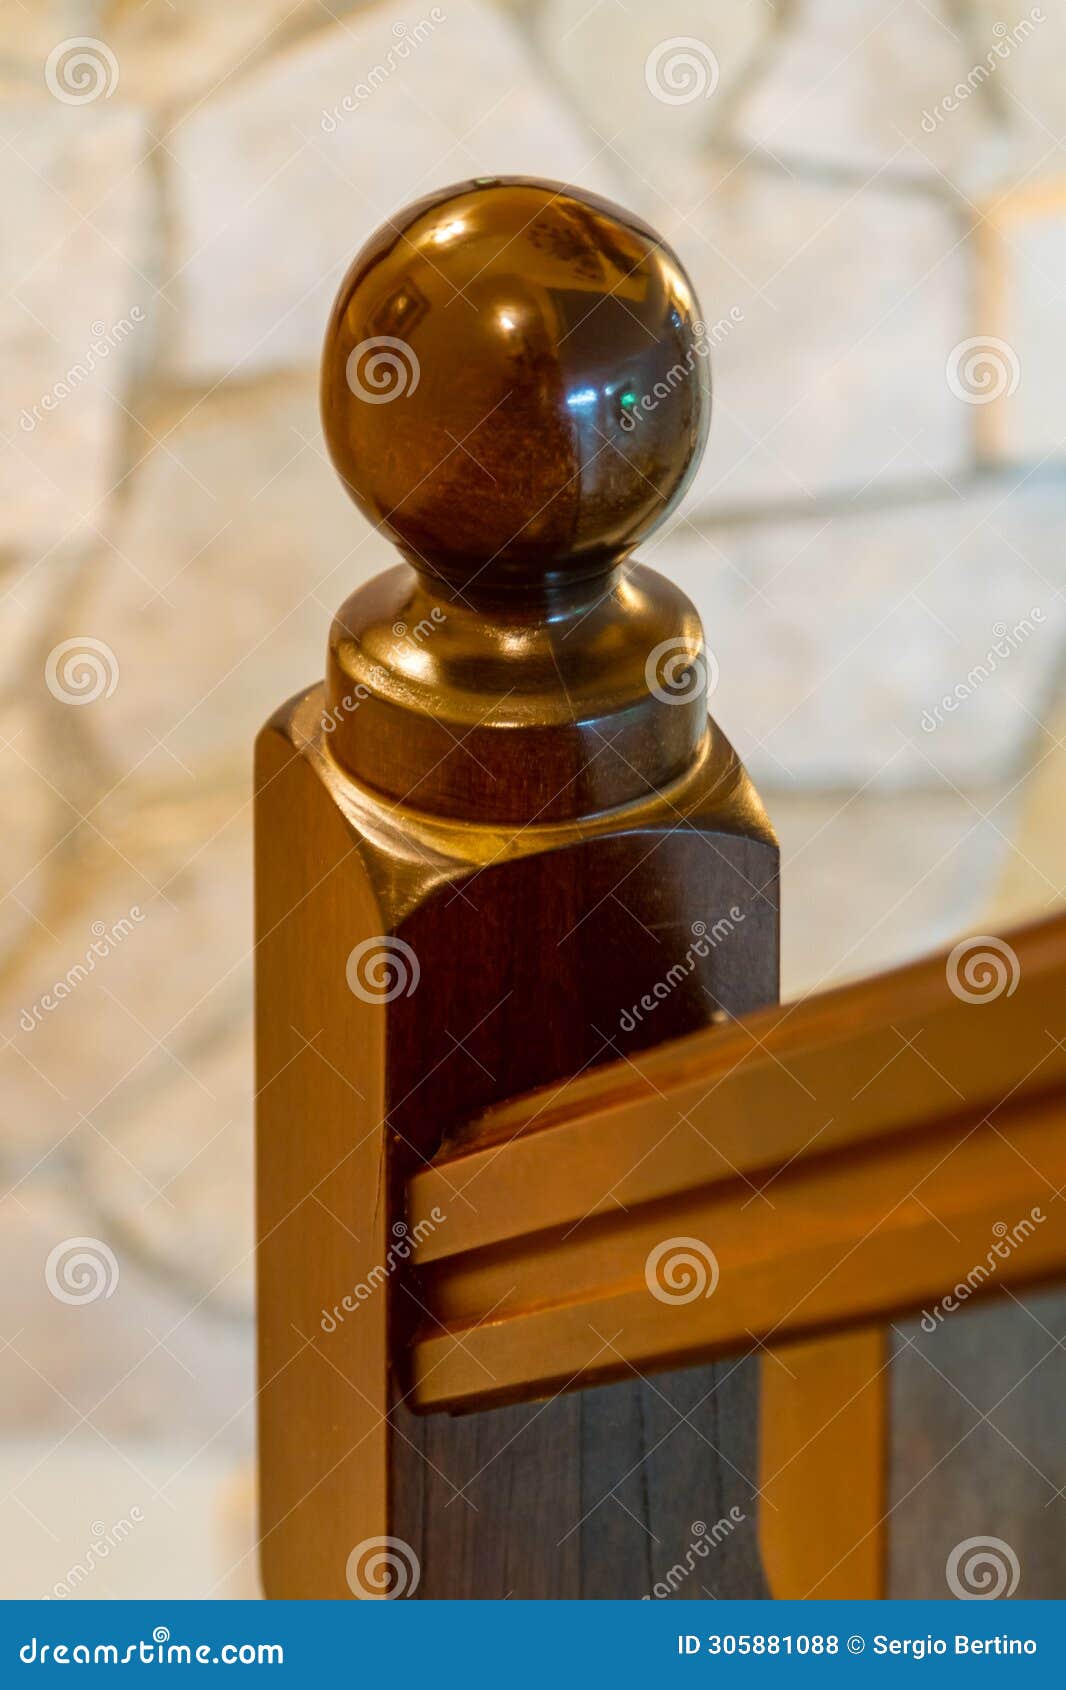 wooden post on the bannister of a stairwell